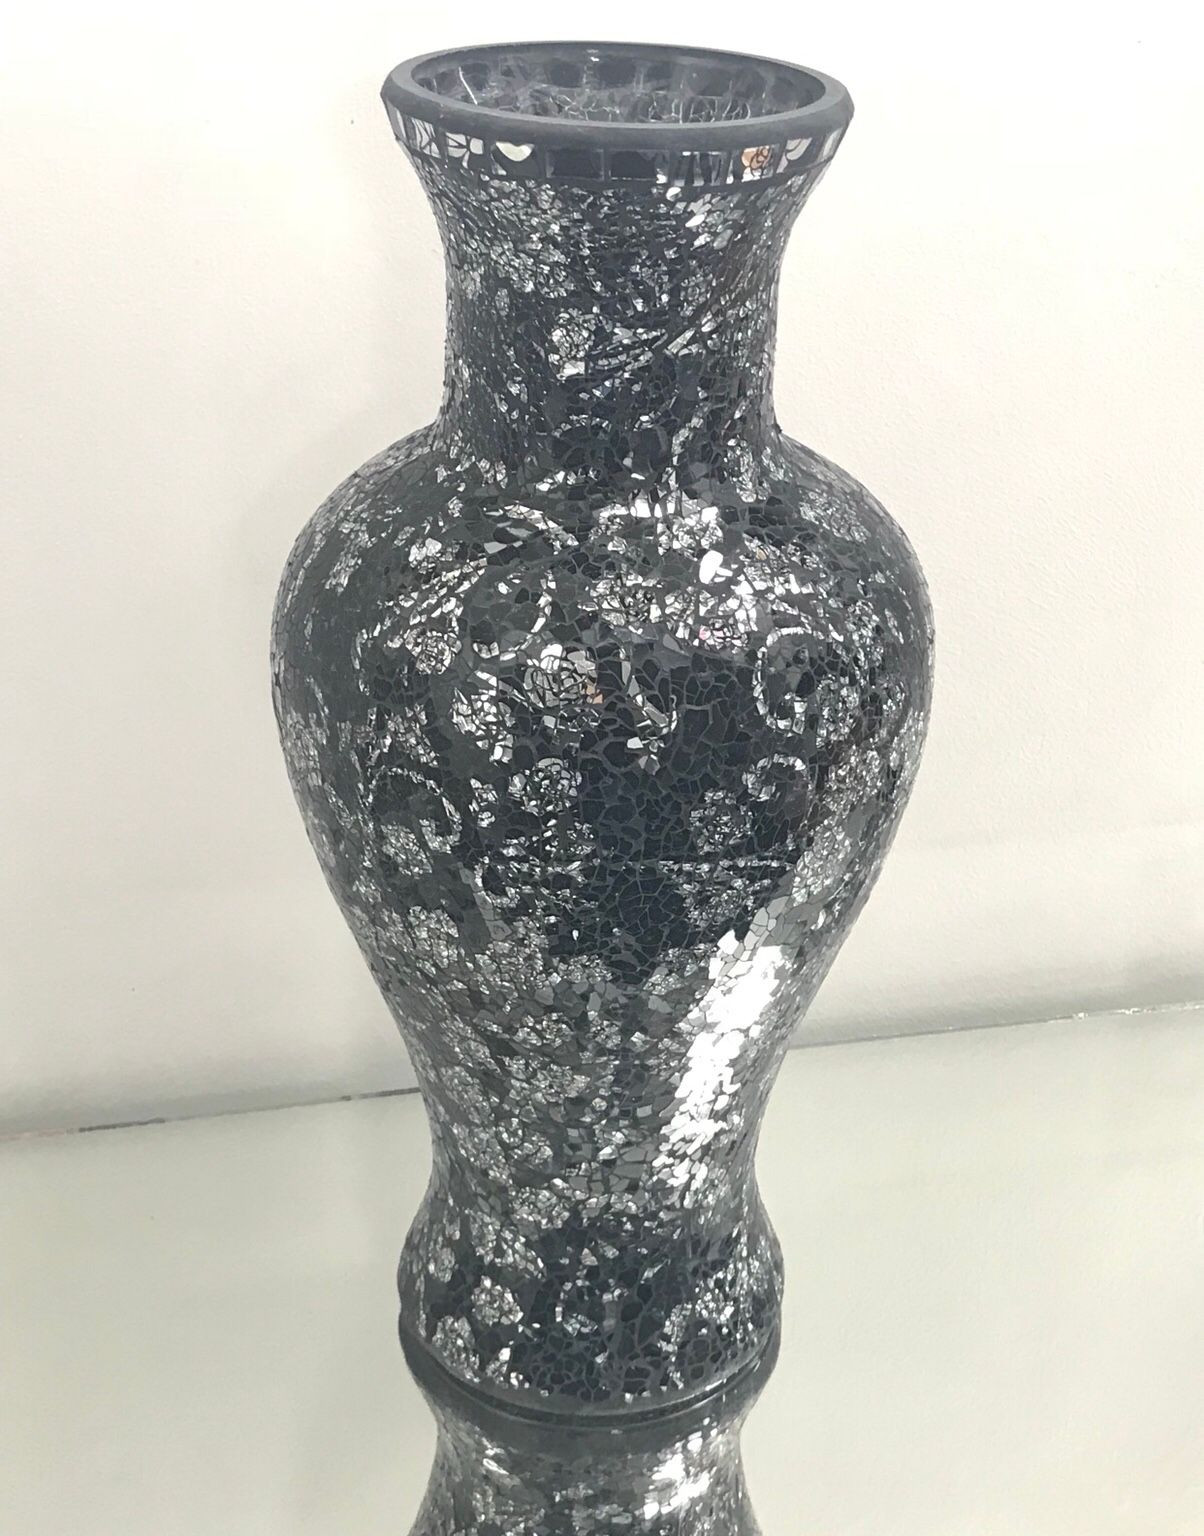 29 Recommended Mannequin Head Vase 2024 free download mannequin head vase of https en shpock com i w5ulxsrgxiy0ann 2018 09 14t122031 pertaining to black and silver new boxed mosaic vase